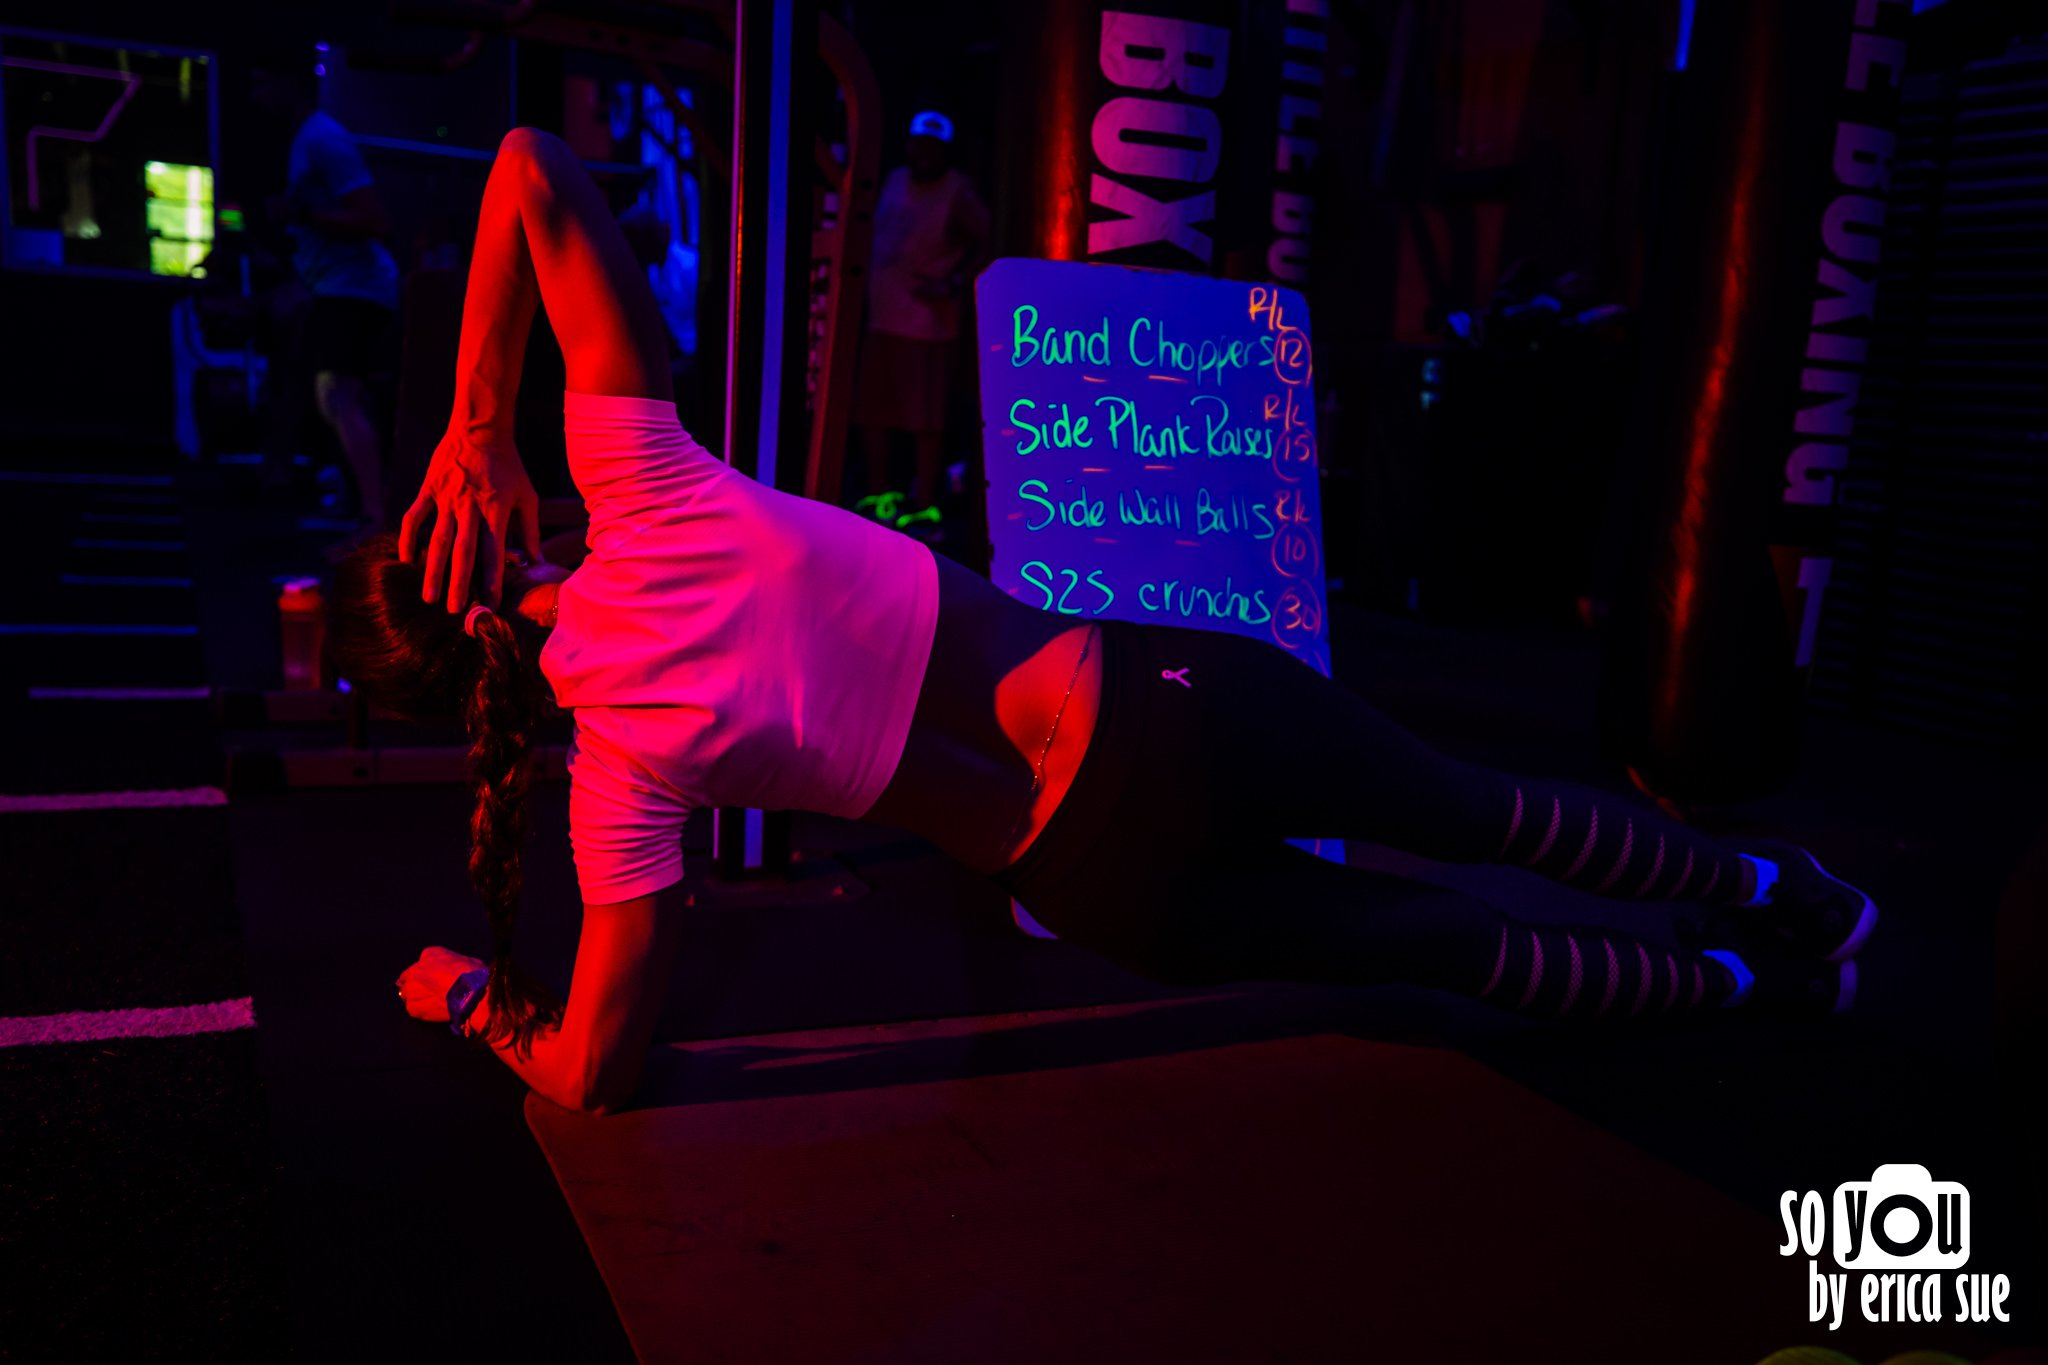 11-challenge-fitness-ft-lauderdale-glow-workout-fri-night-lights-so-you-by-erica-sue-davie-photographer-ES3_6299.jpg